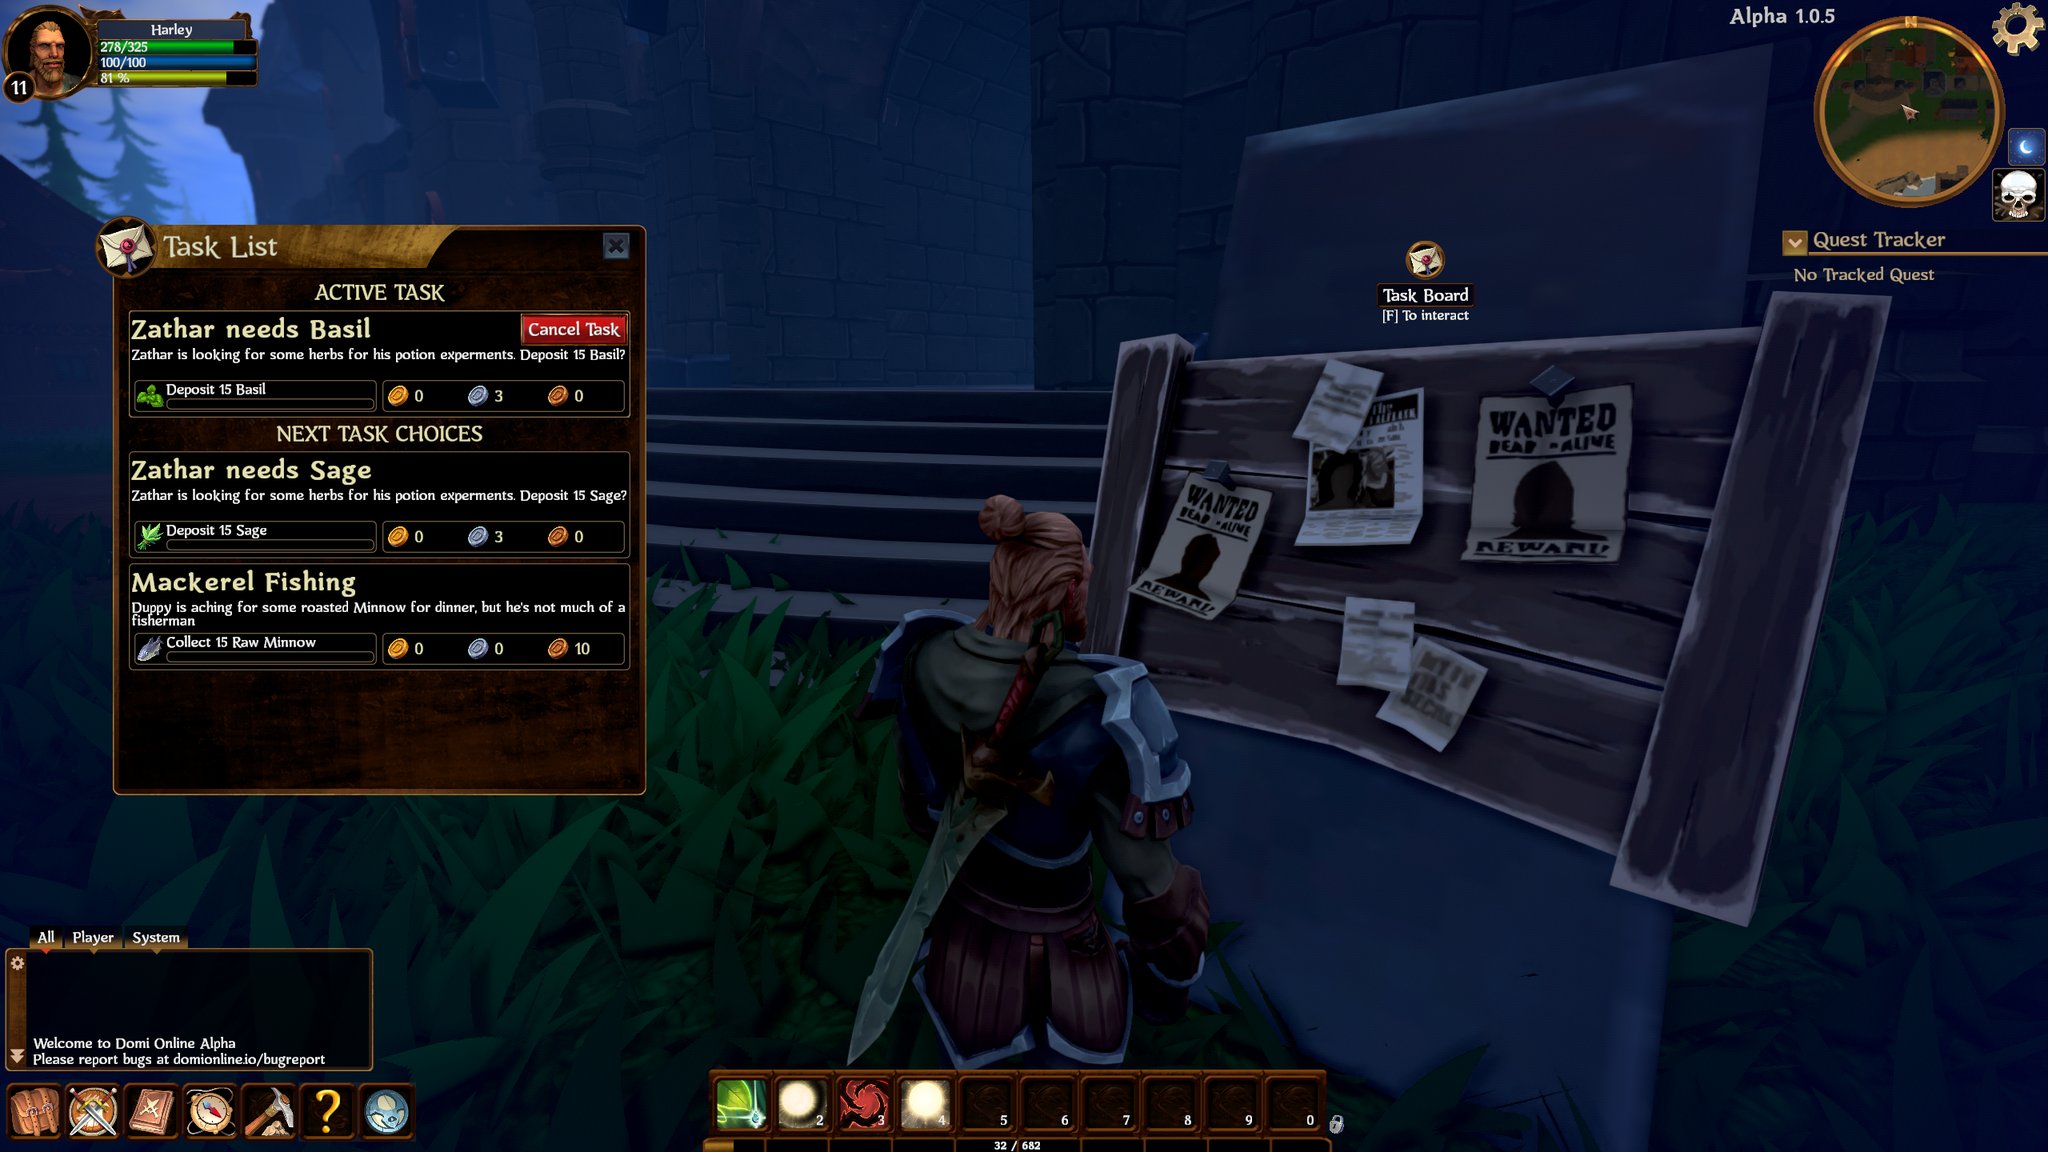 The game features a task board that allows players to complete tasks in exchange for experience, items, and in-game currency. The rewards vary based on the task's difficulty.